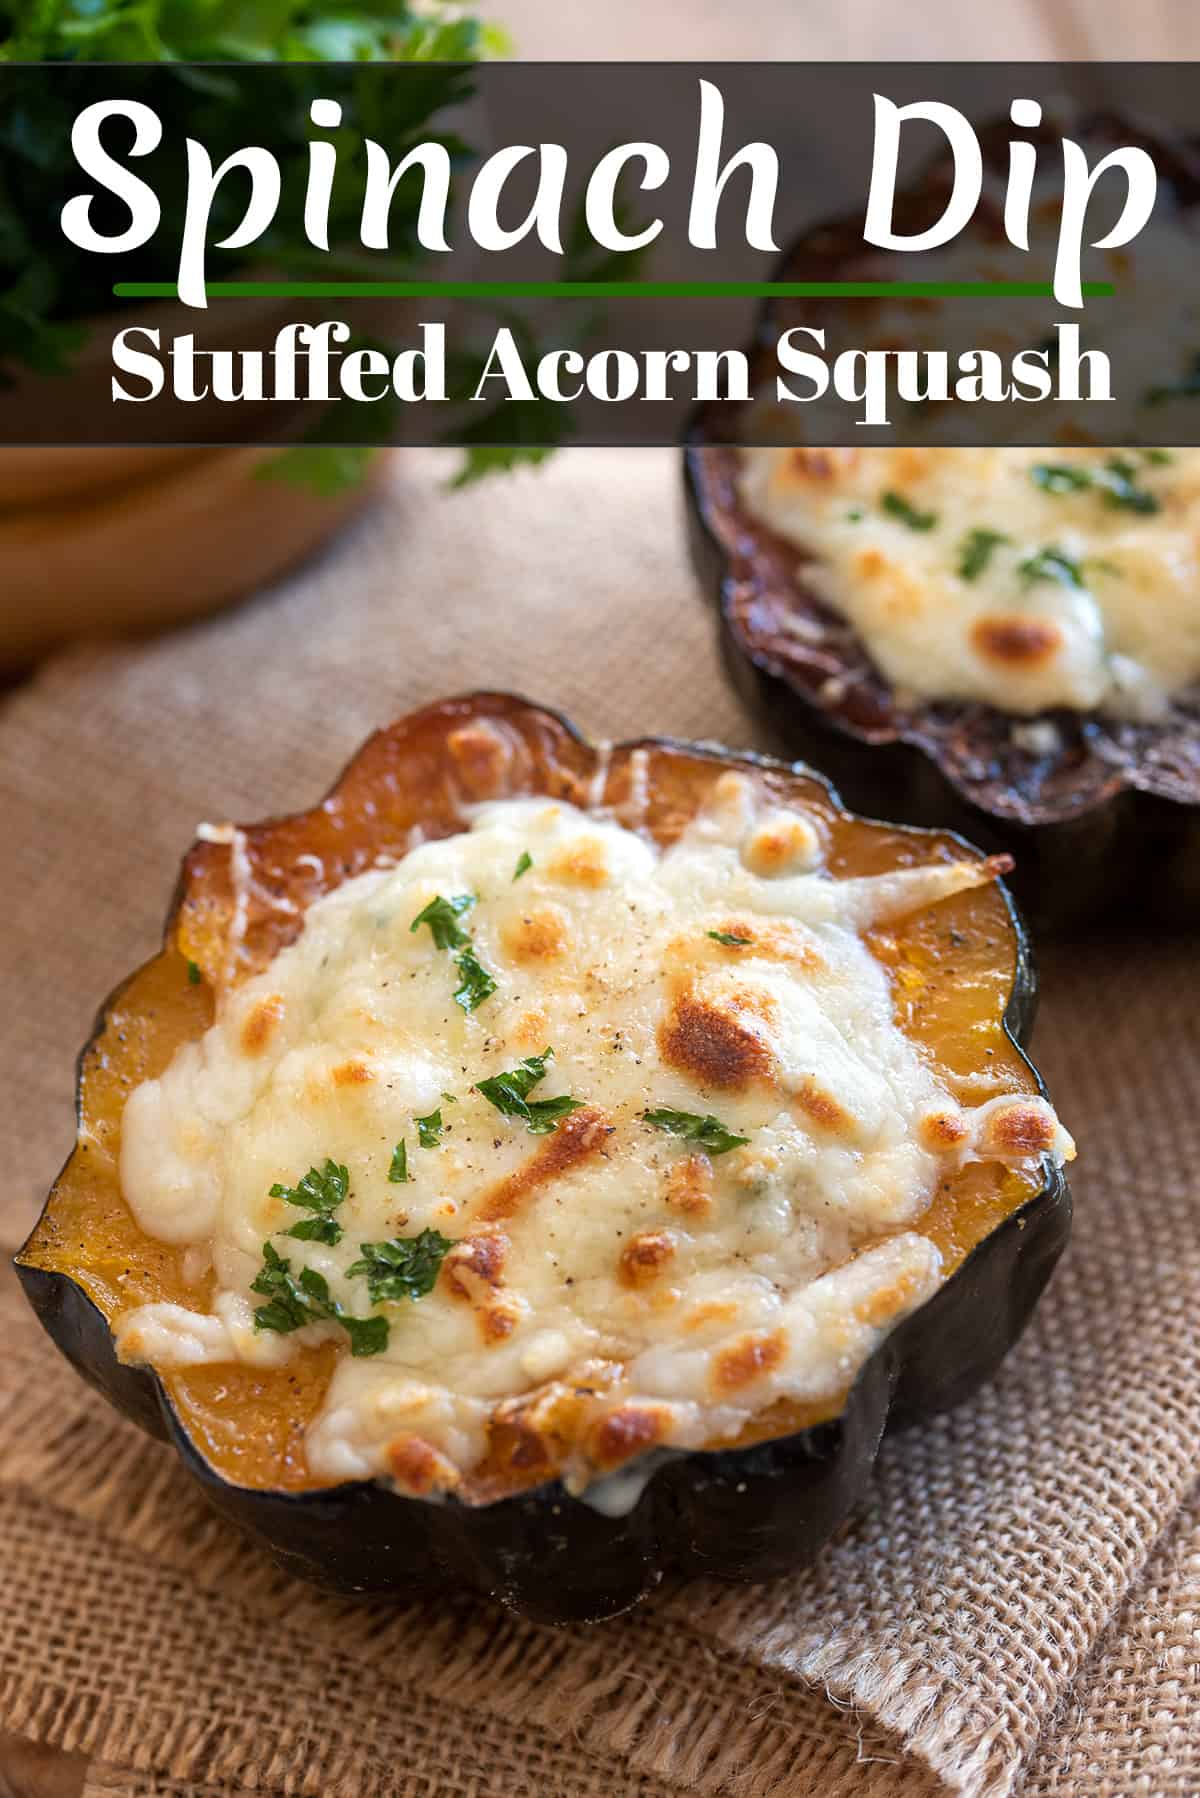 Spinach stuffed acorn squash face up on cutting board with title.